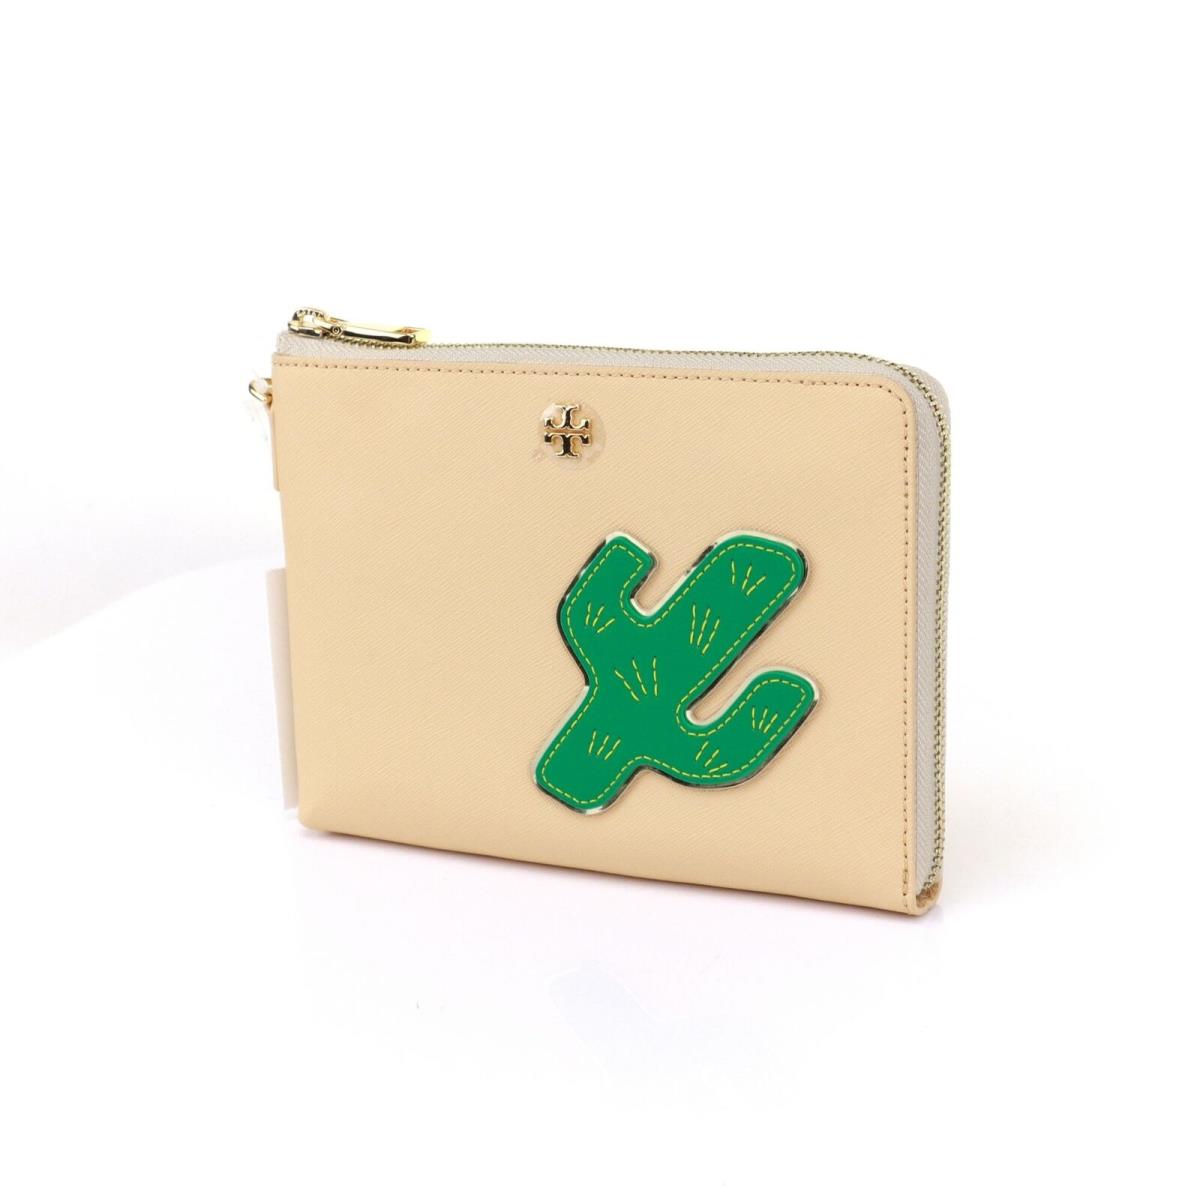 Tory Burch Robinson Cactus Travel Pouch Wristlet - Tory Burch wallet -  043475323120 | Fash Brands